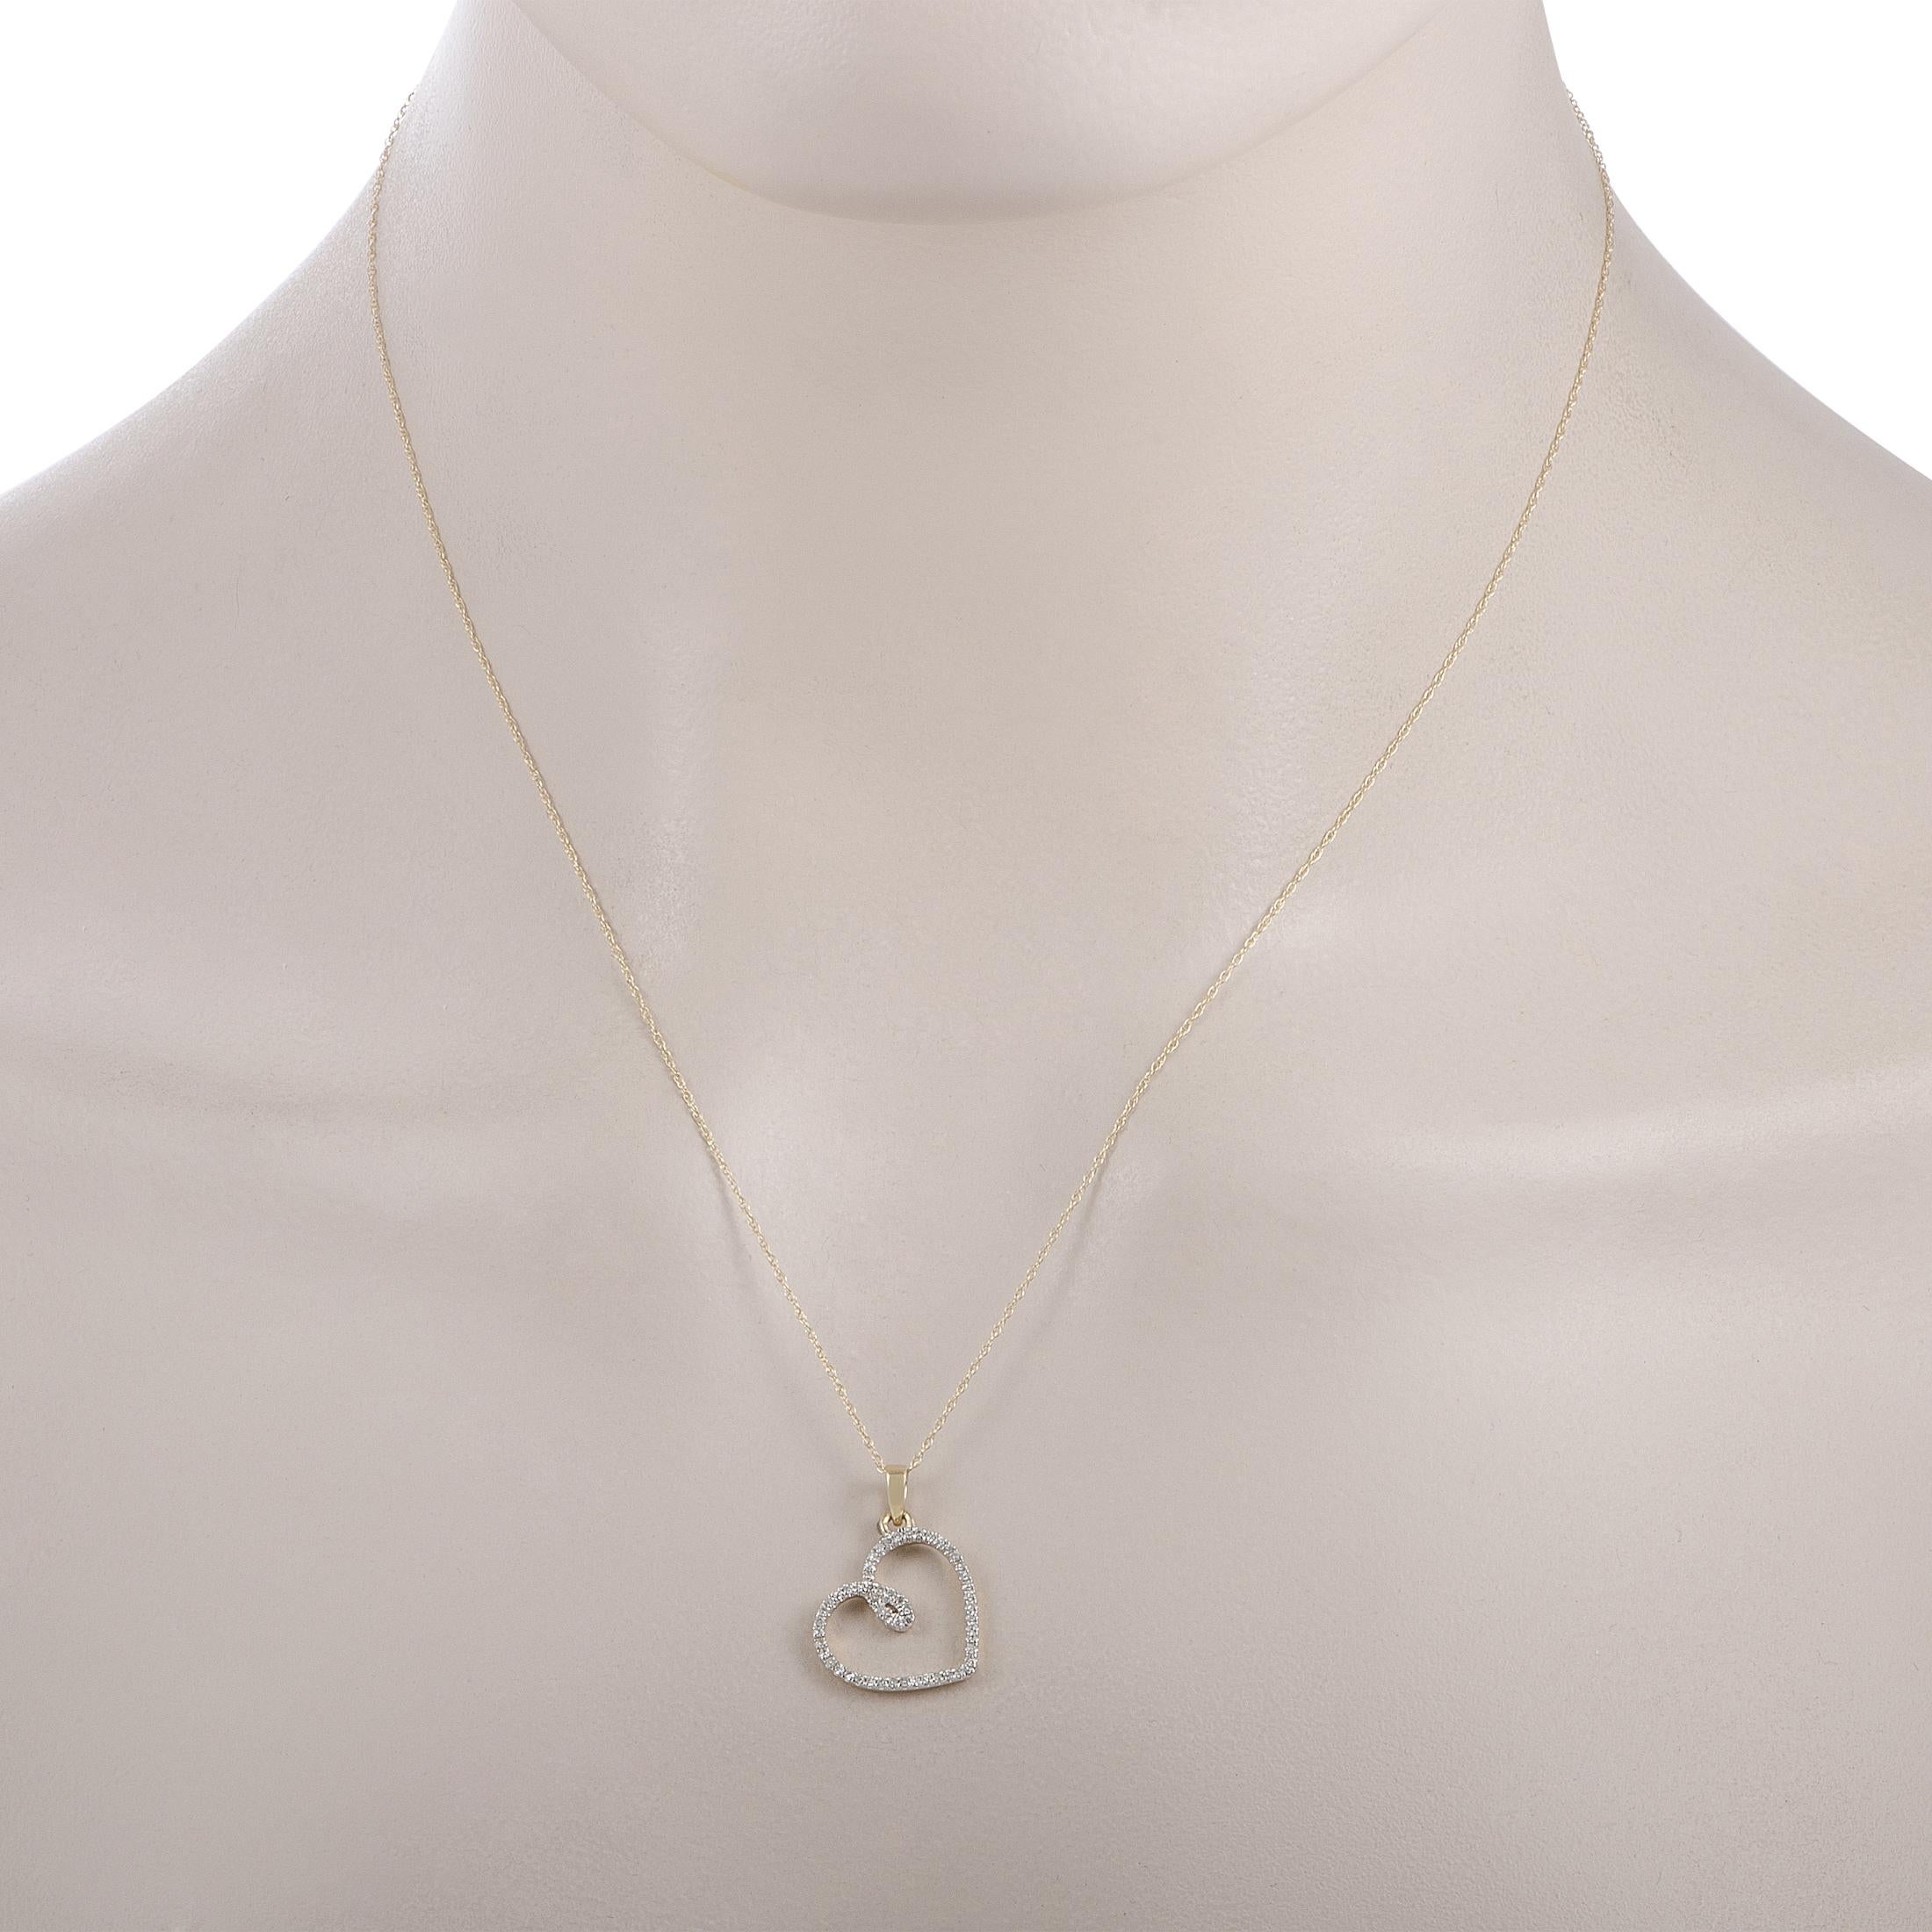 This necklace is crafted from 14K yellow gold and weighs 1.5 grams, boasting chain length of 18.00” while the pendant measures 0.80” by 0.65”. The necklace is set with diamonds that weigh 0.19 carats in total.
 
 Offered in brand new condition, this